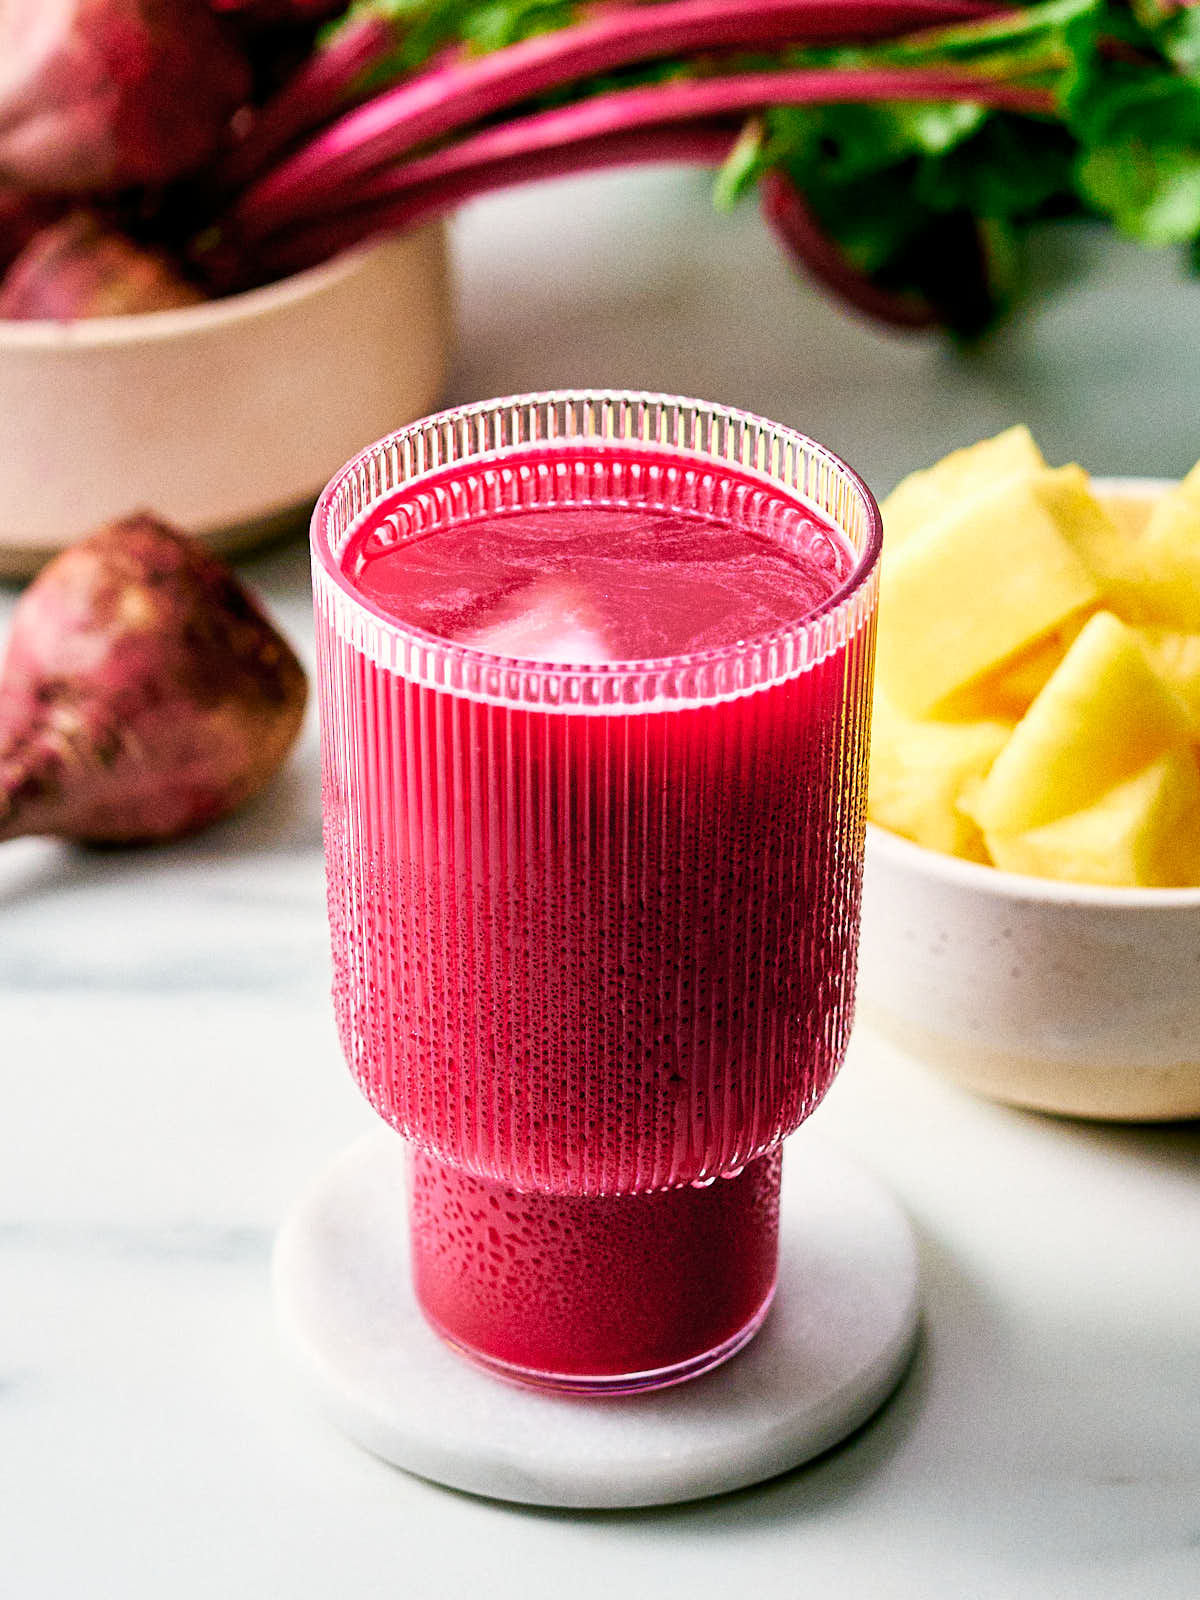 Beet Pineapple Juice in a glass with fresh pineapple and beet in bowls.